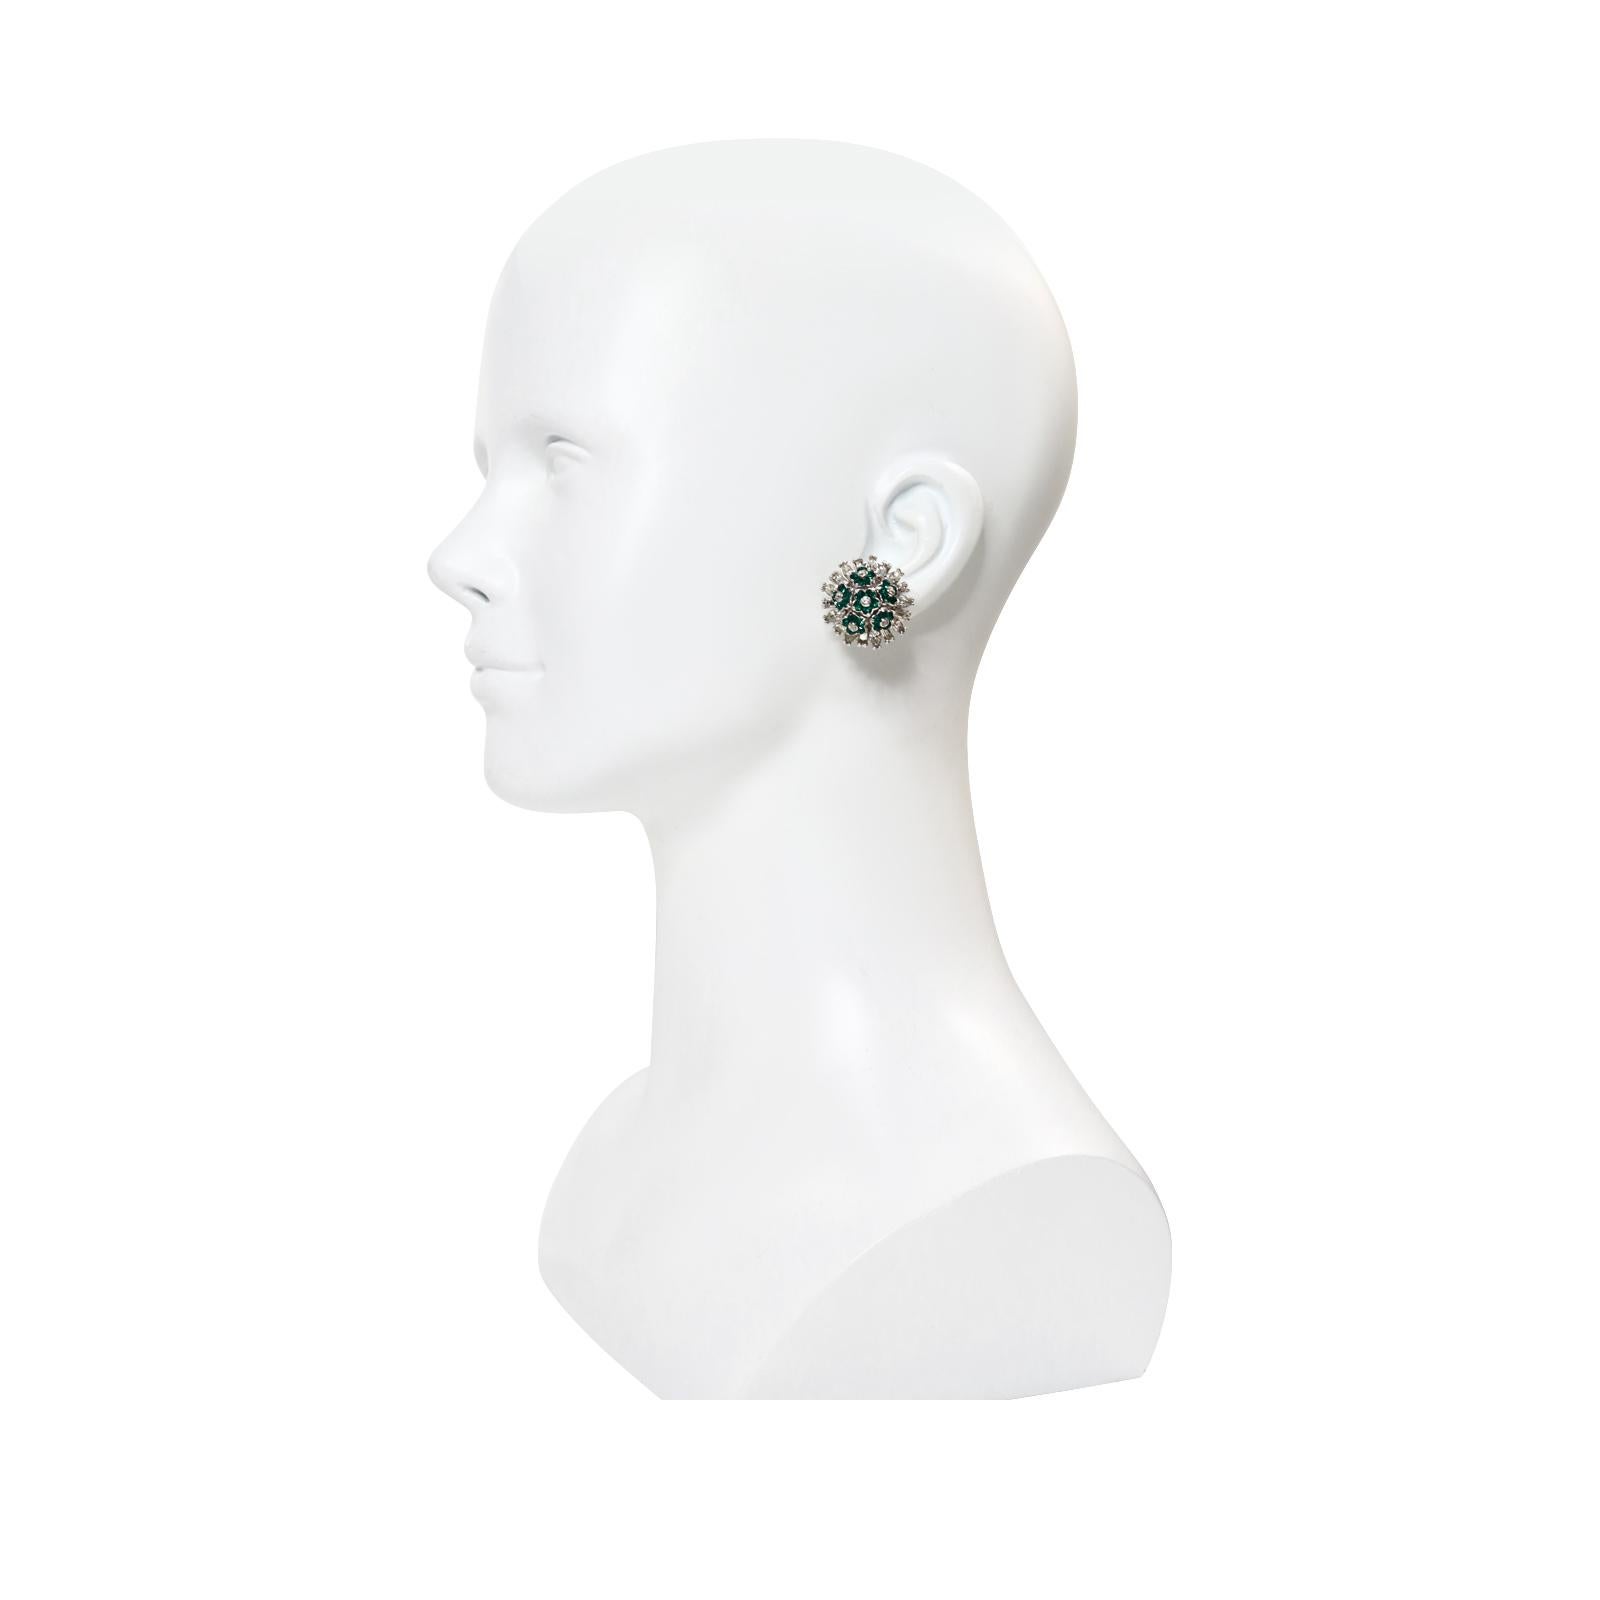 Vintage Pennino Emerald Green and Crystal Flower Earrings Circa 1960s For Sale 4